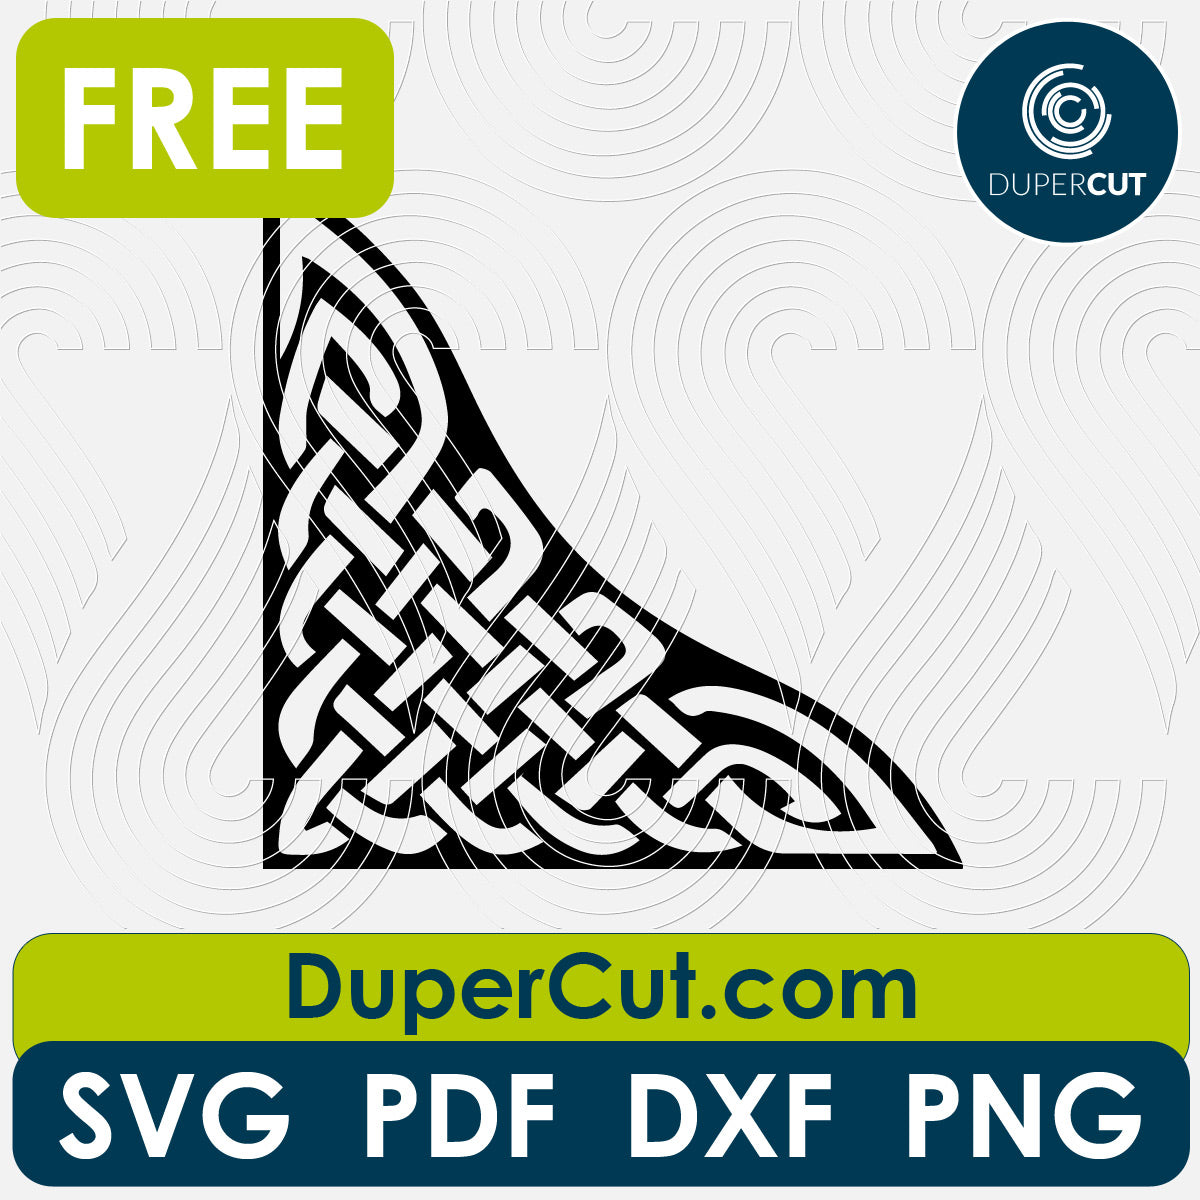 Celtic knot border design, FREE cutting template SVG PNG DXF files for Glowforge, Cricut, Silhouette, CNC laser router by DuperCut.com